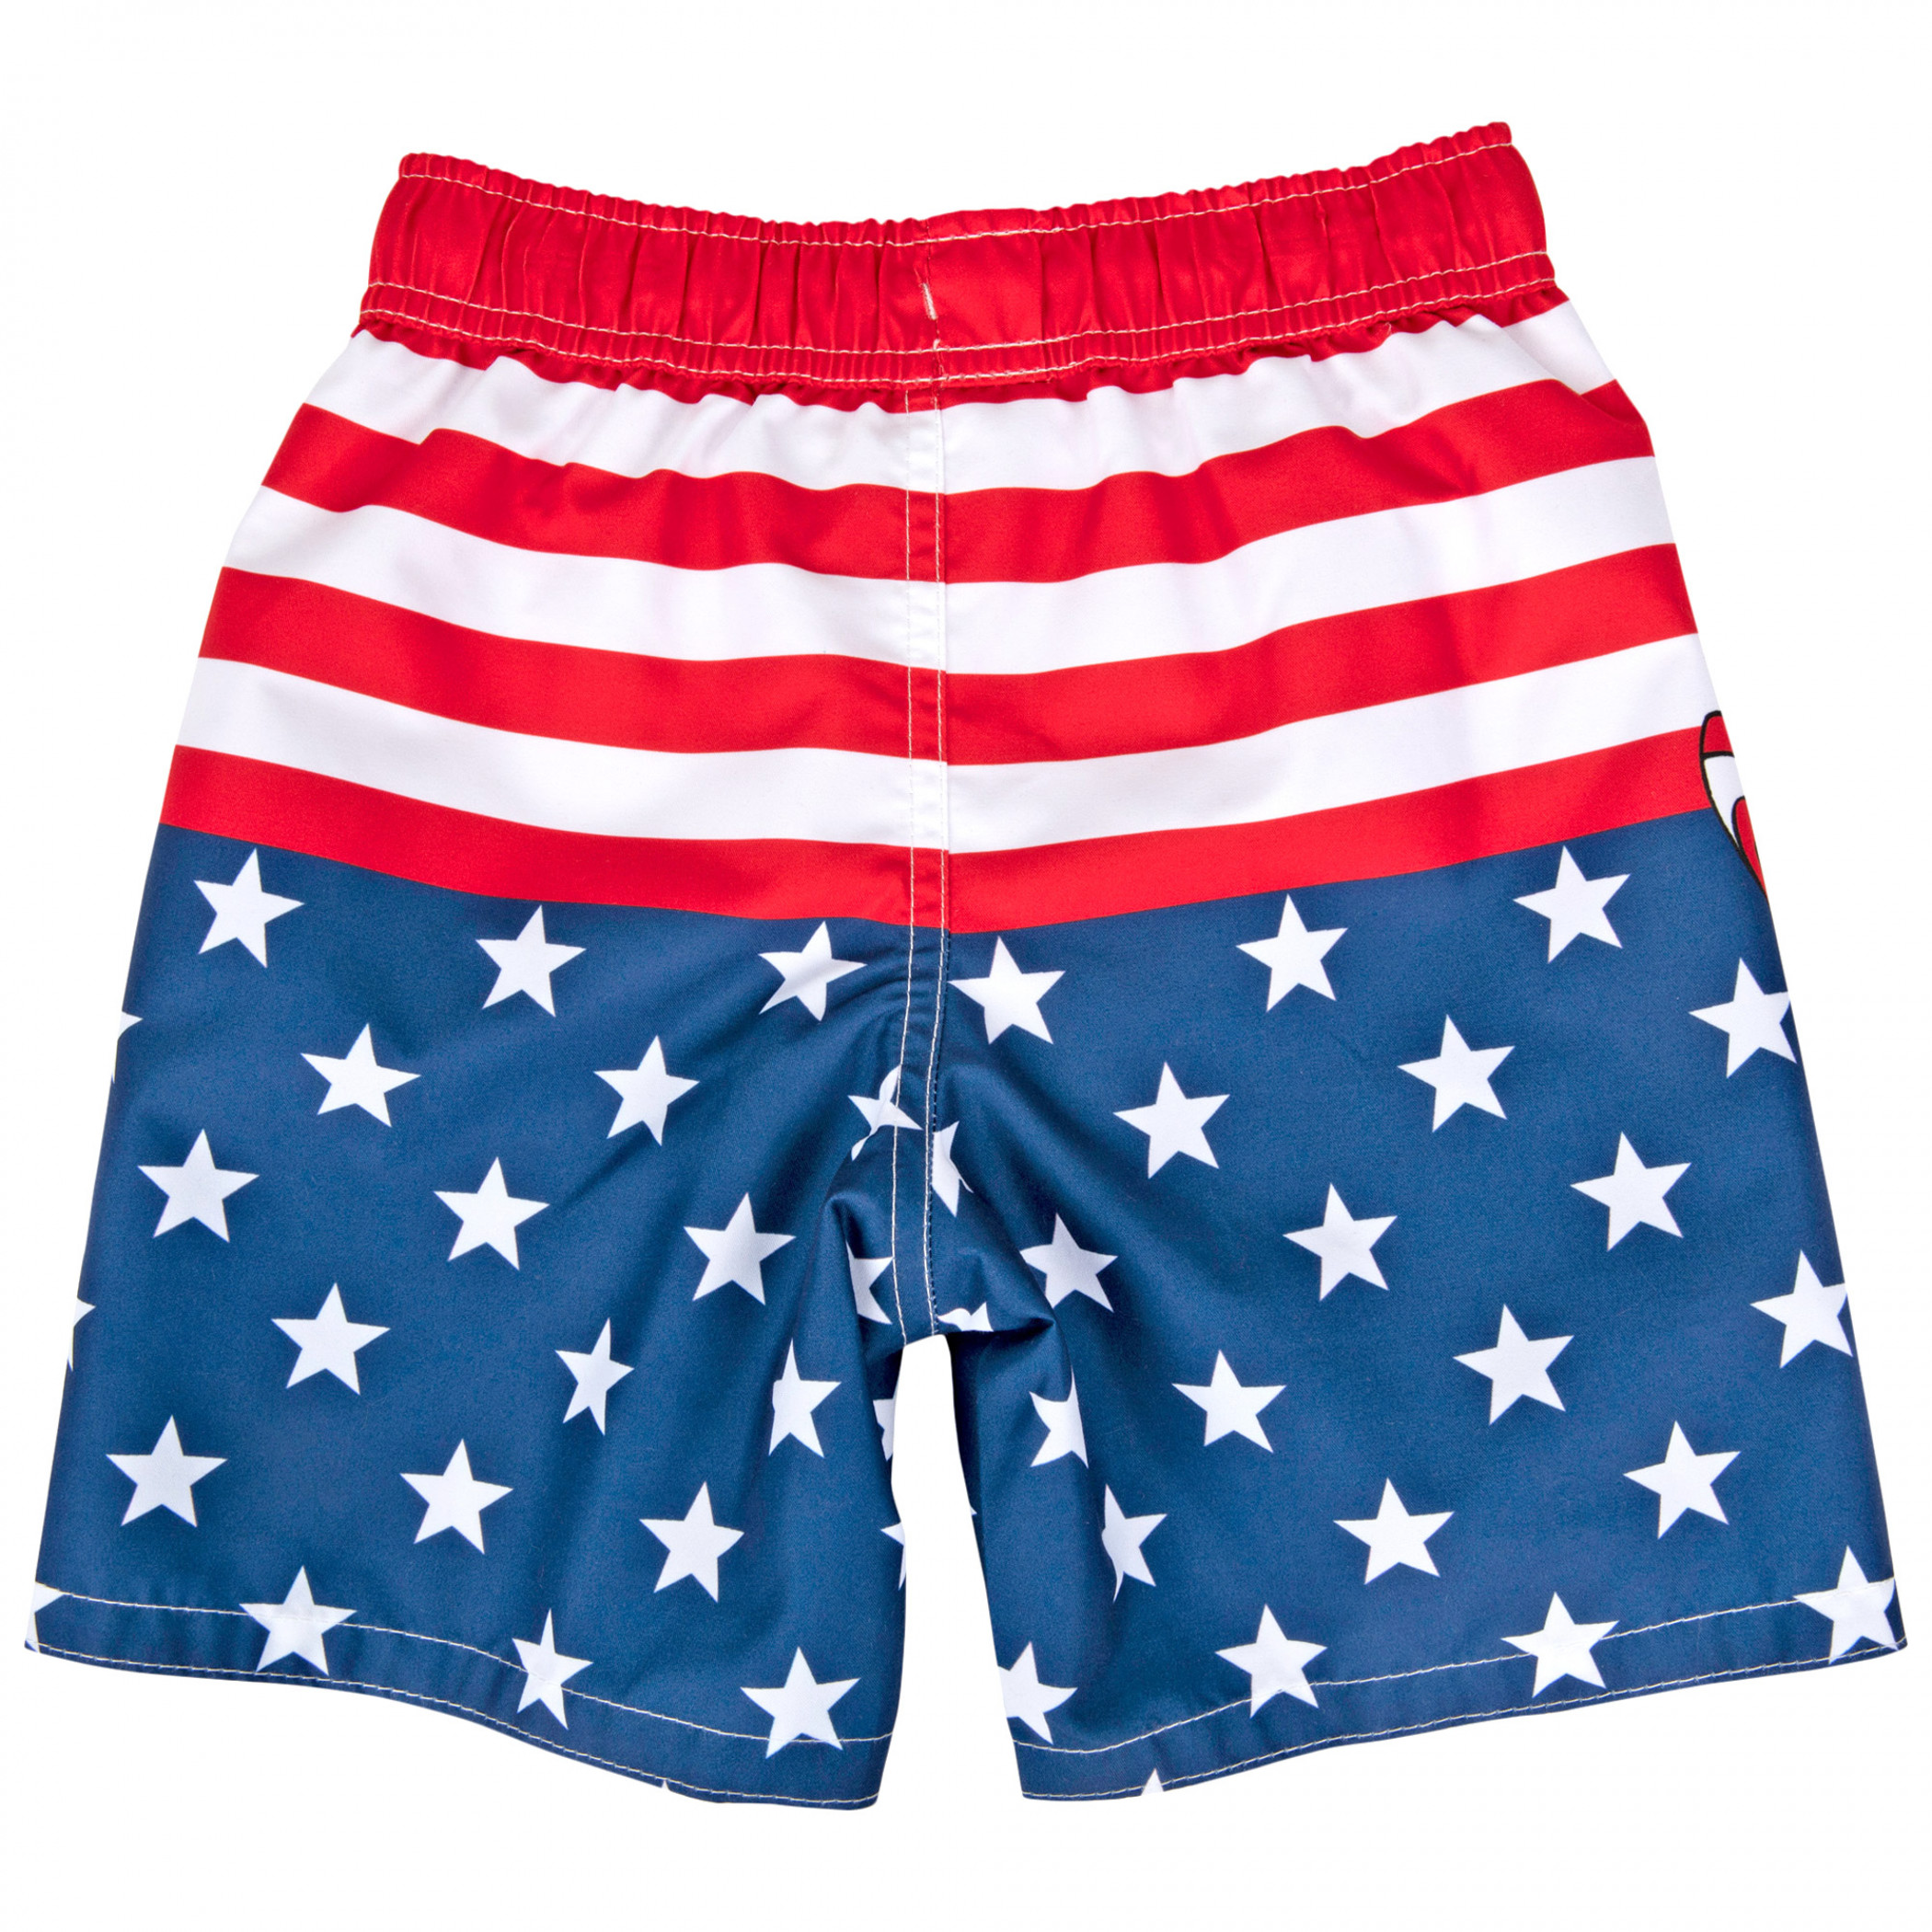 Captain America Character With Stars and Stripes Youth Swim Shorts